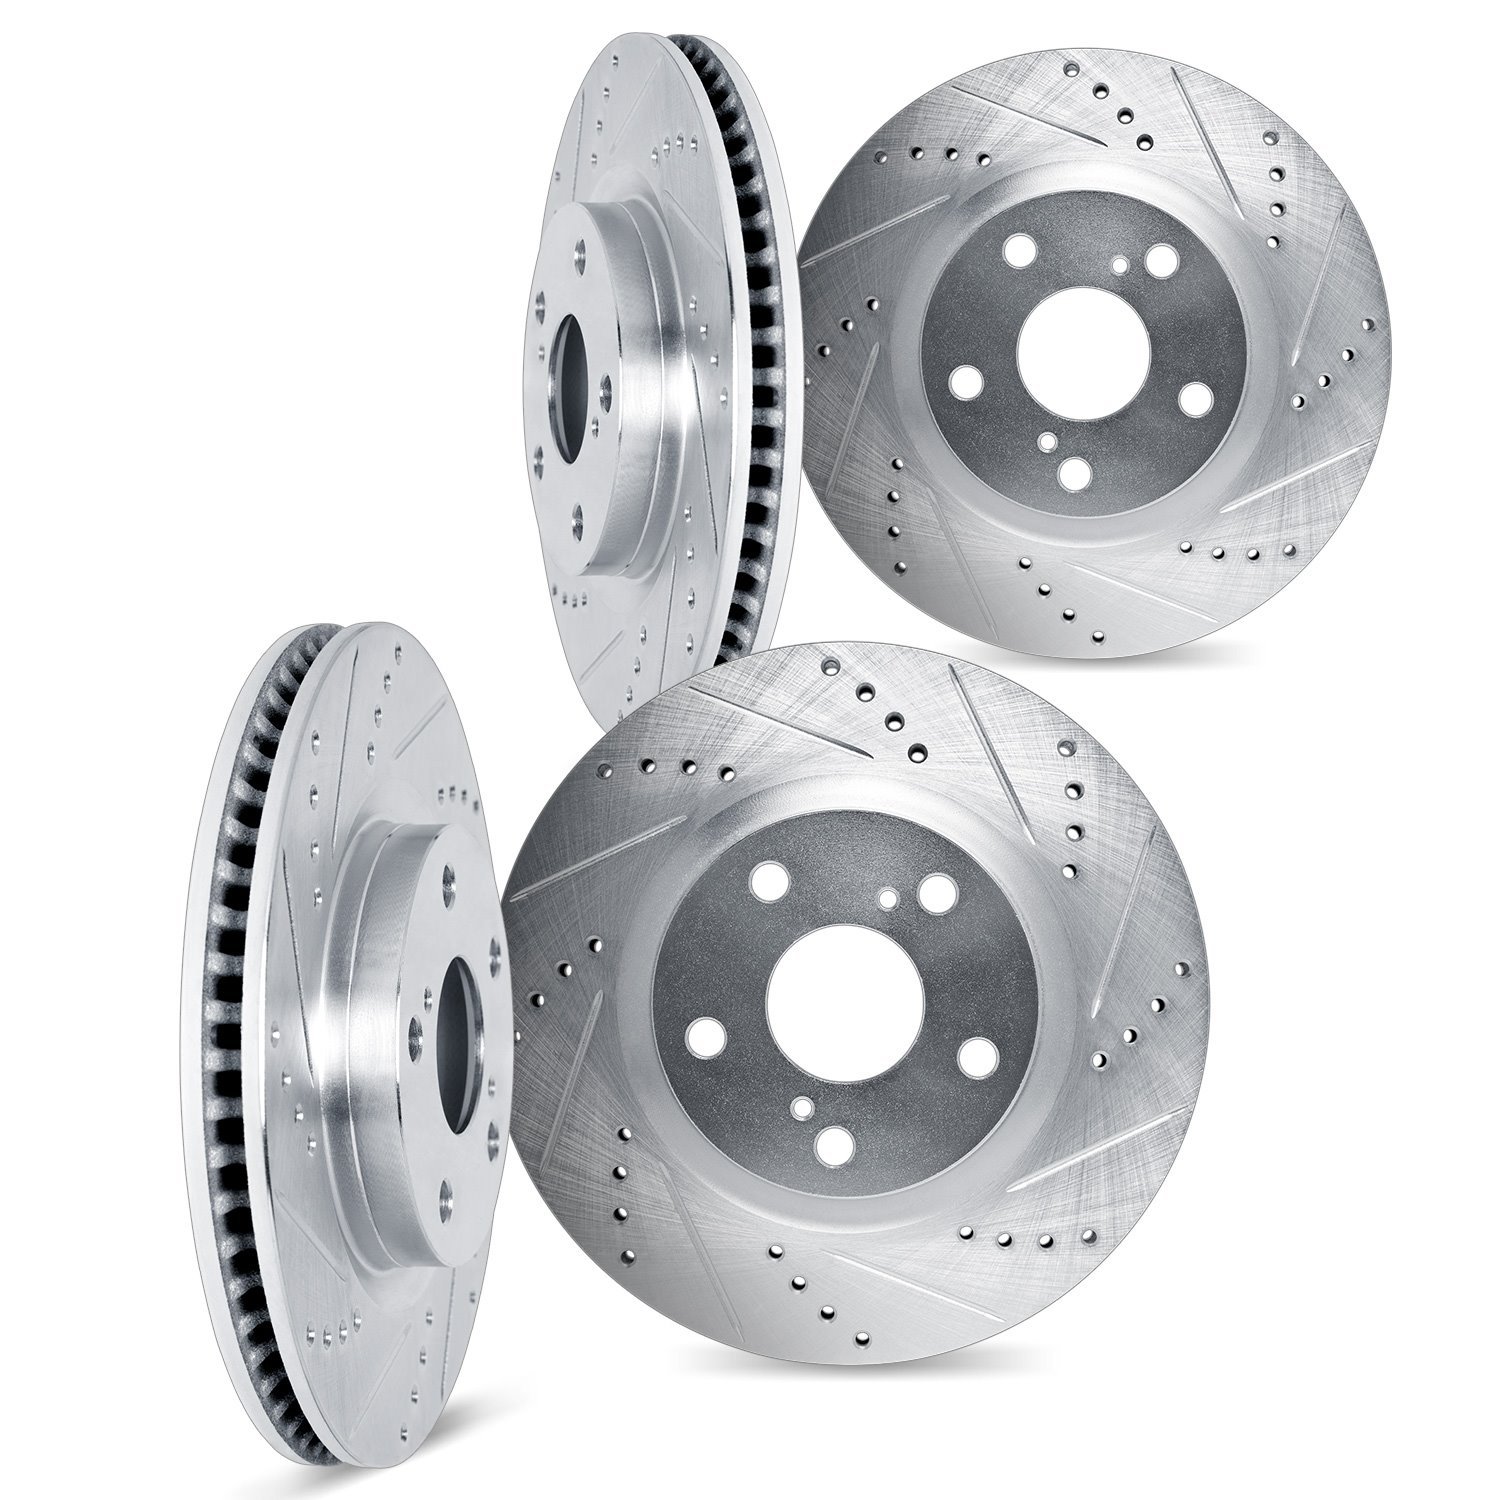 7004-54134 Drilled/Slotted Brake Rotors [Silver], Fits Select Ford/Lincoln/Mercury/Mazda, Position: Front and Rear